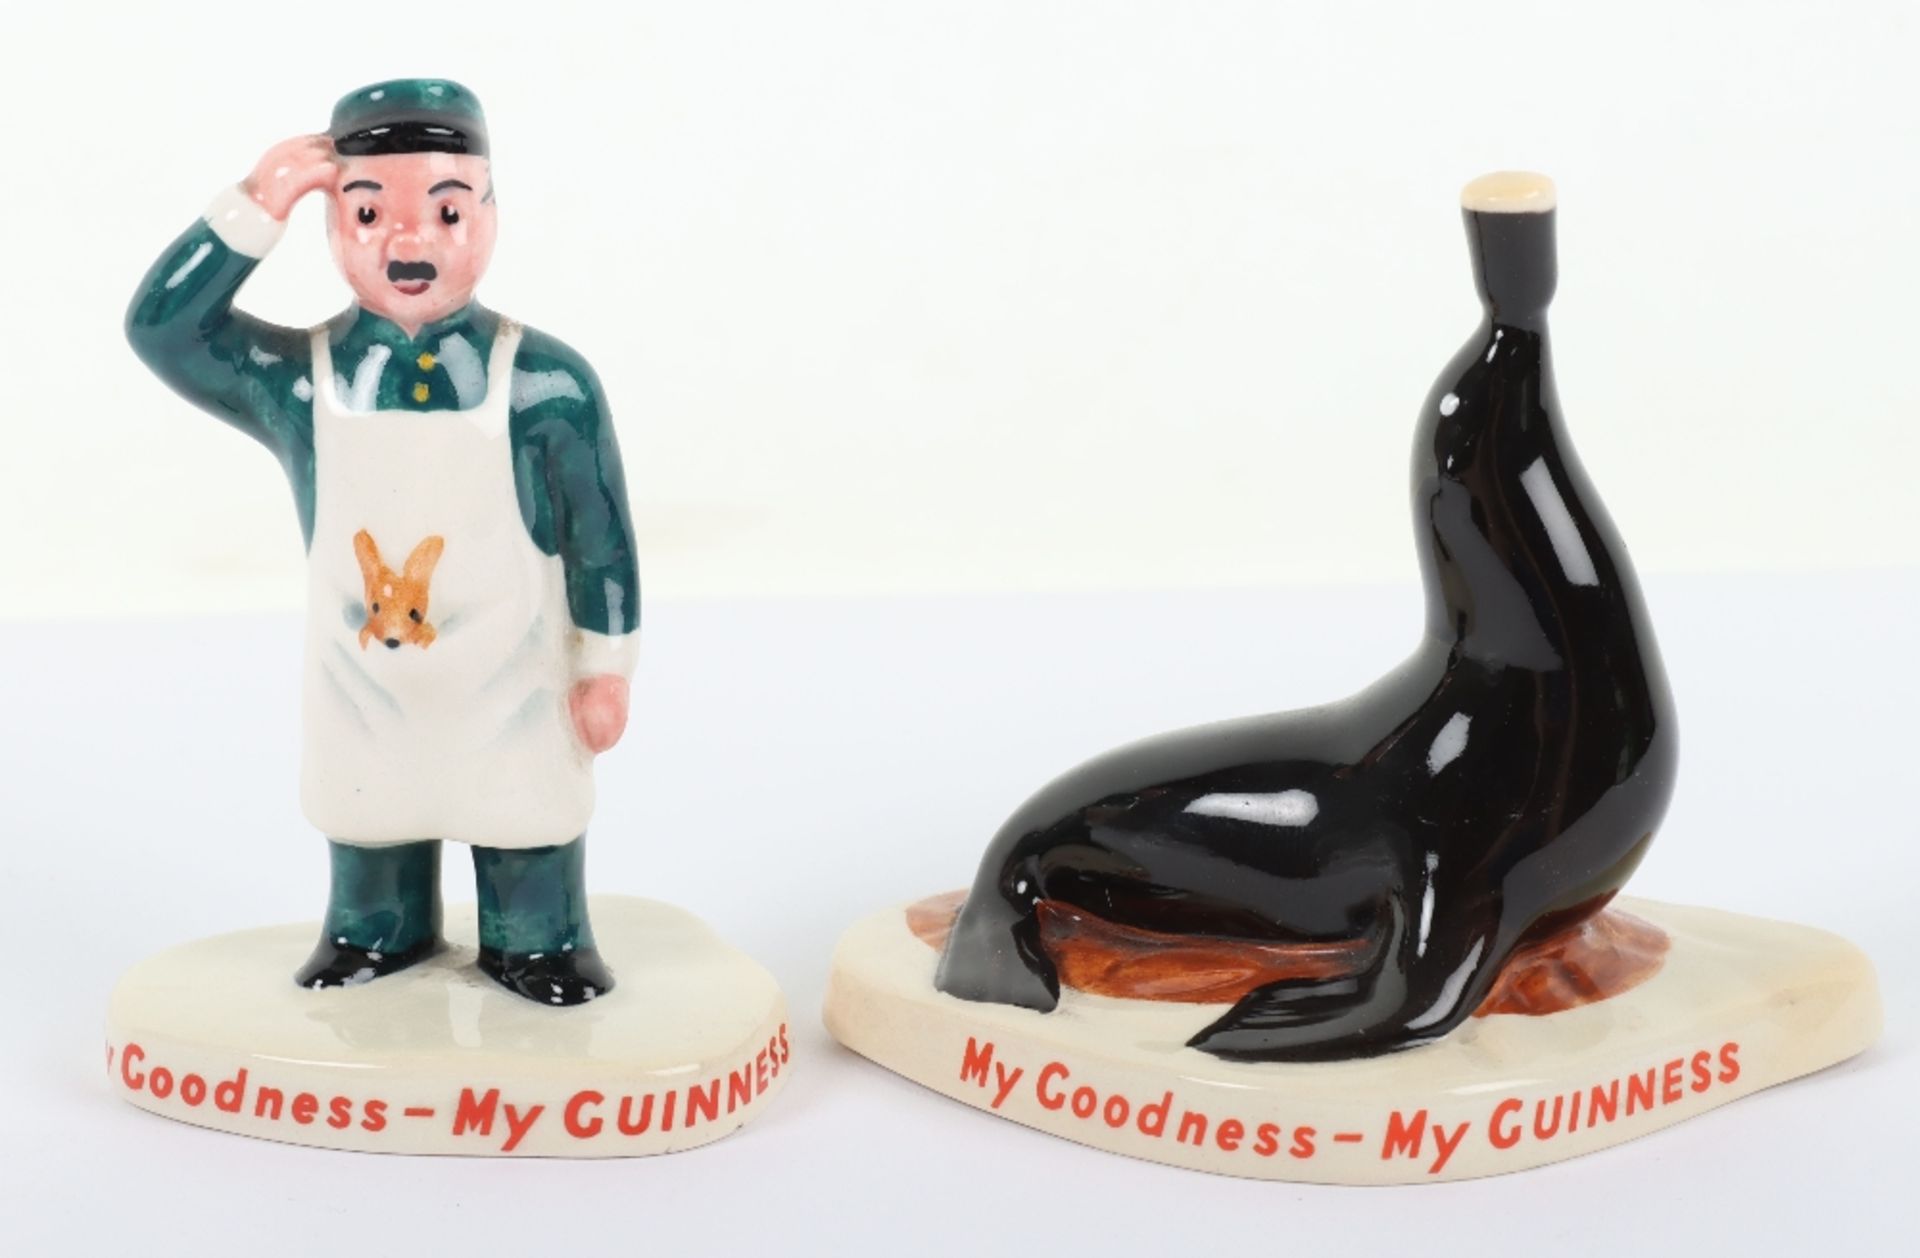 Two original ‘My Goodness My Guiness’ figures